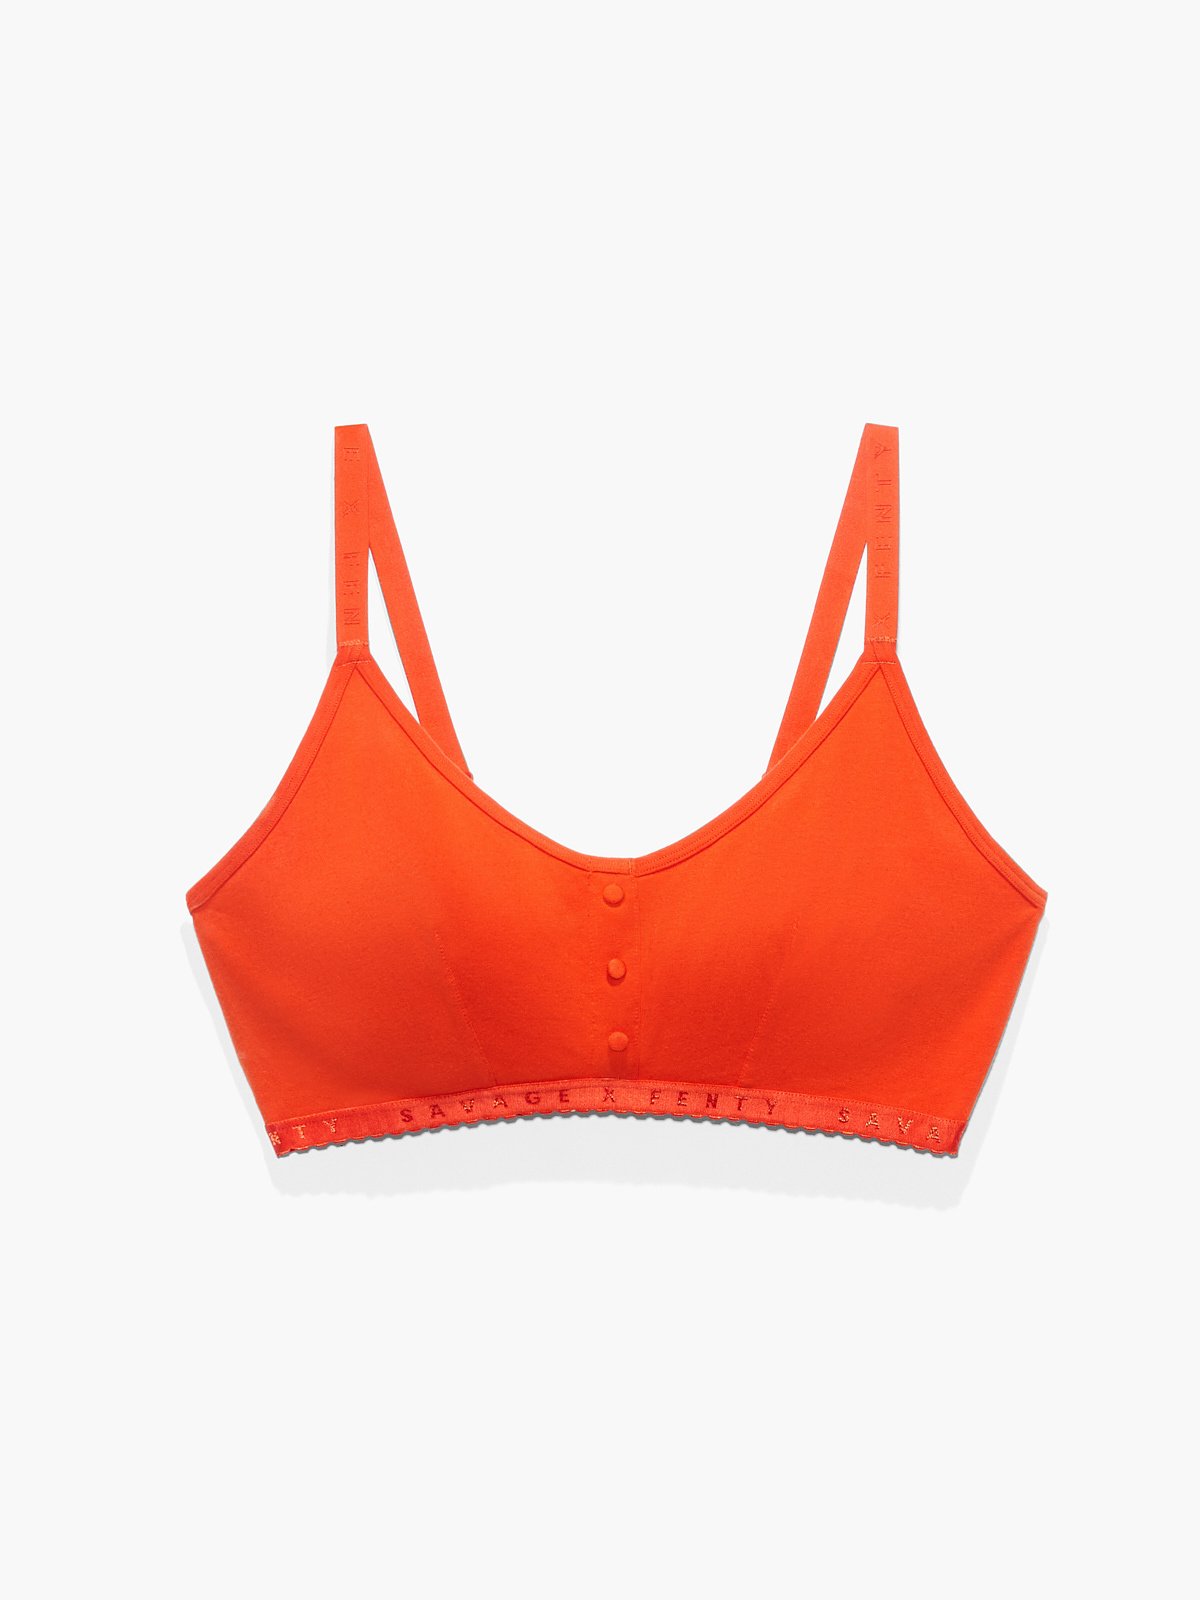 Savage X Fenty Extra Large Unlined Microfiber Bralette Goji Berry Red Size  XL - $14 - From Relove